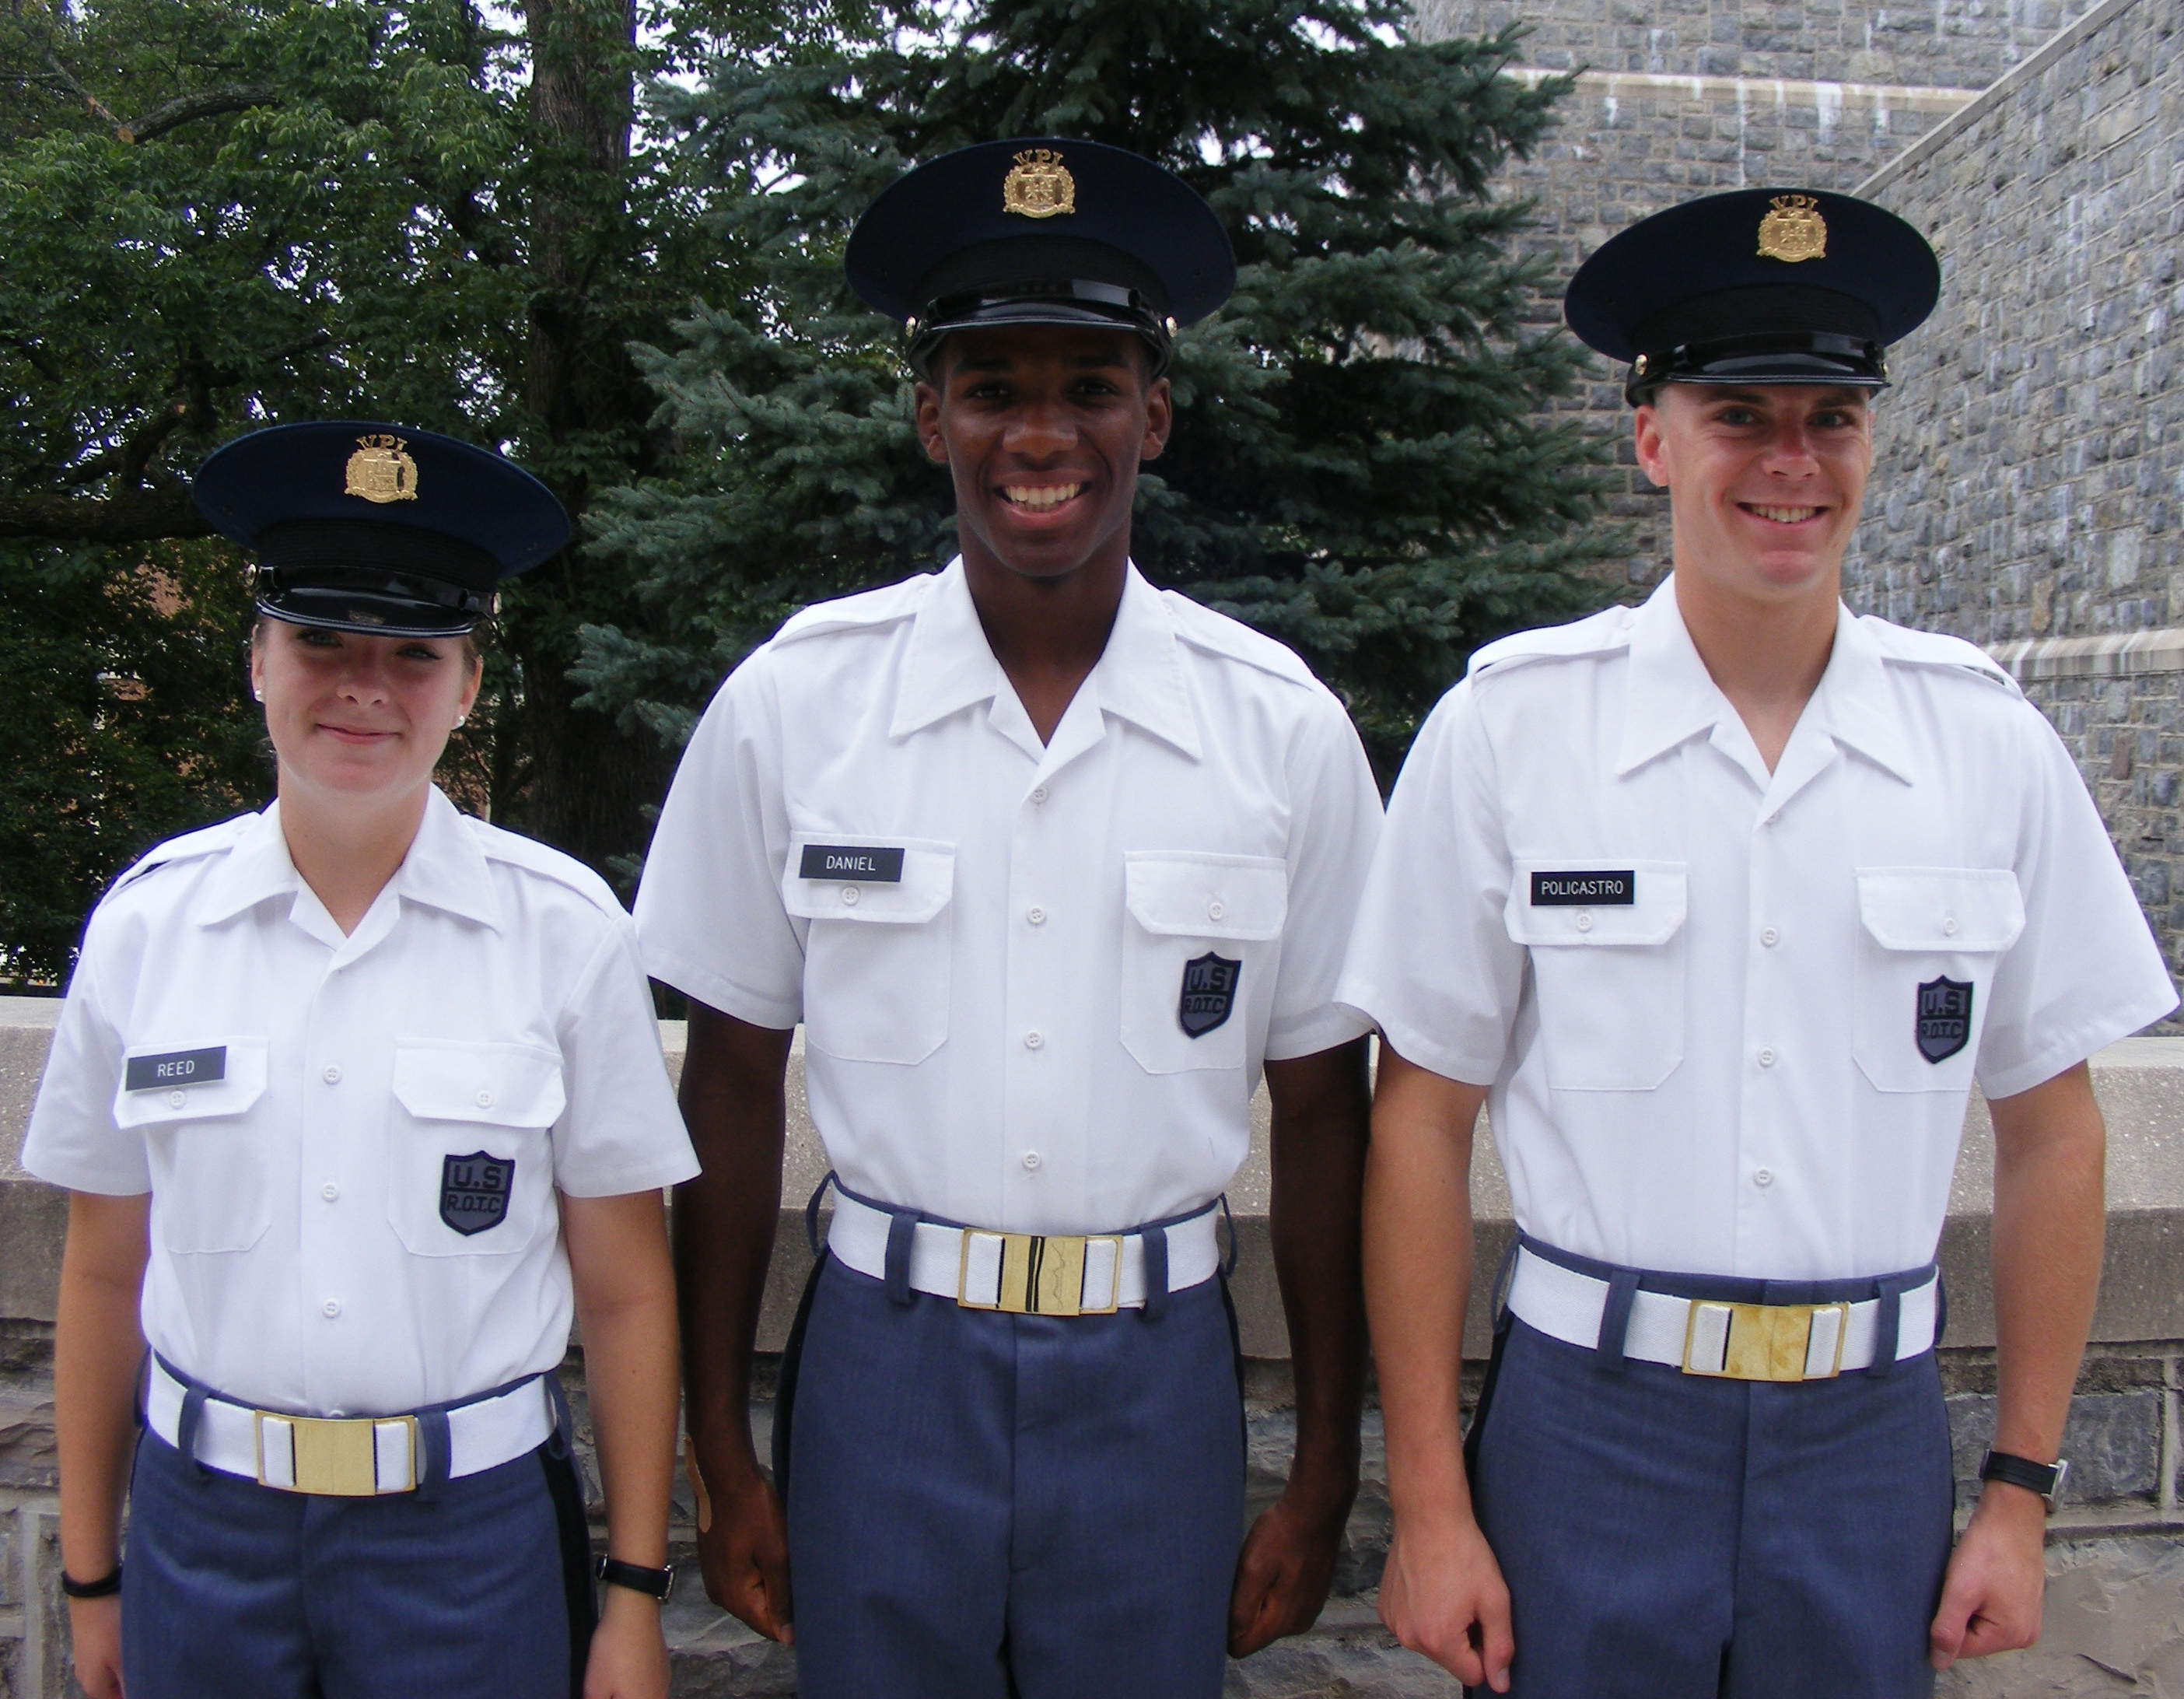 From left to right standing in front of Torgerson Hall are Cadets Samantha Reed, Lyndon Daniel, and Carlo Policastro